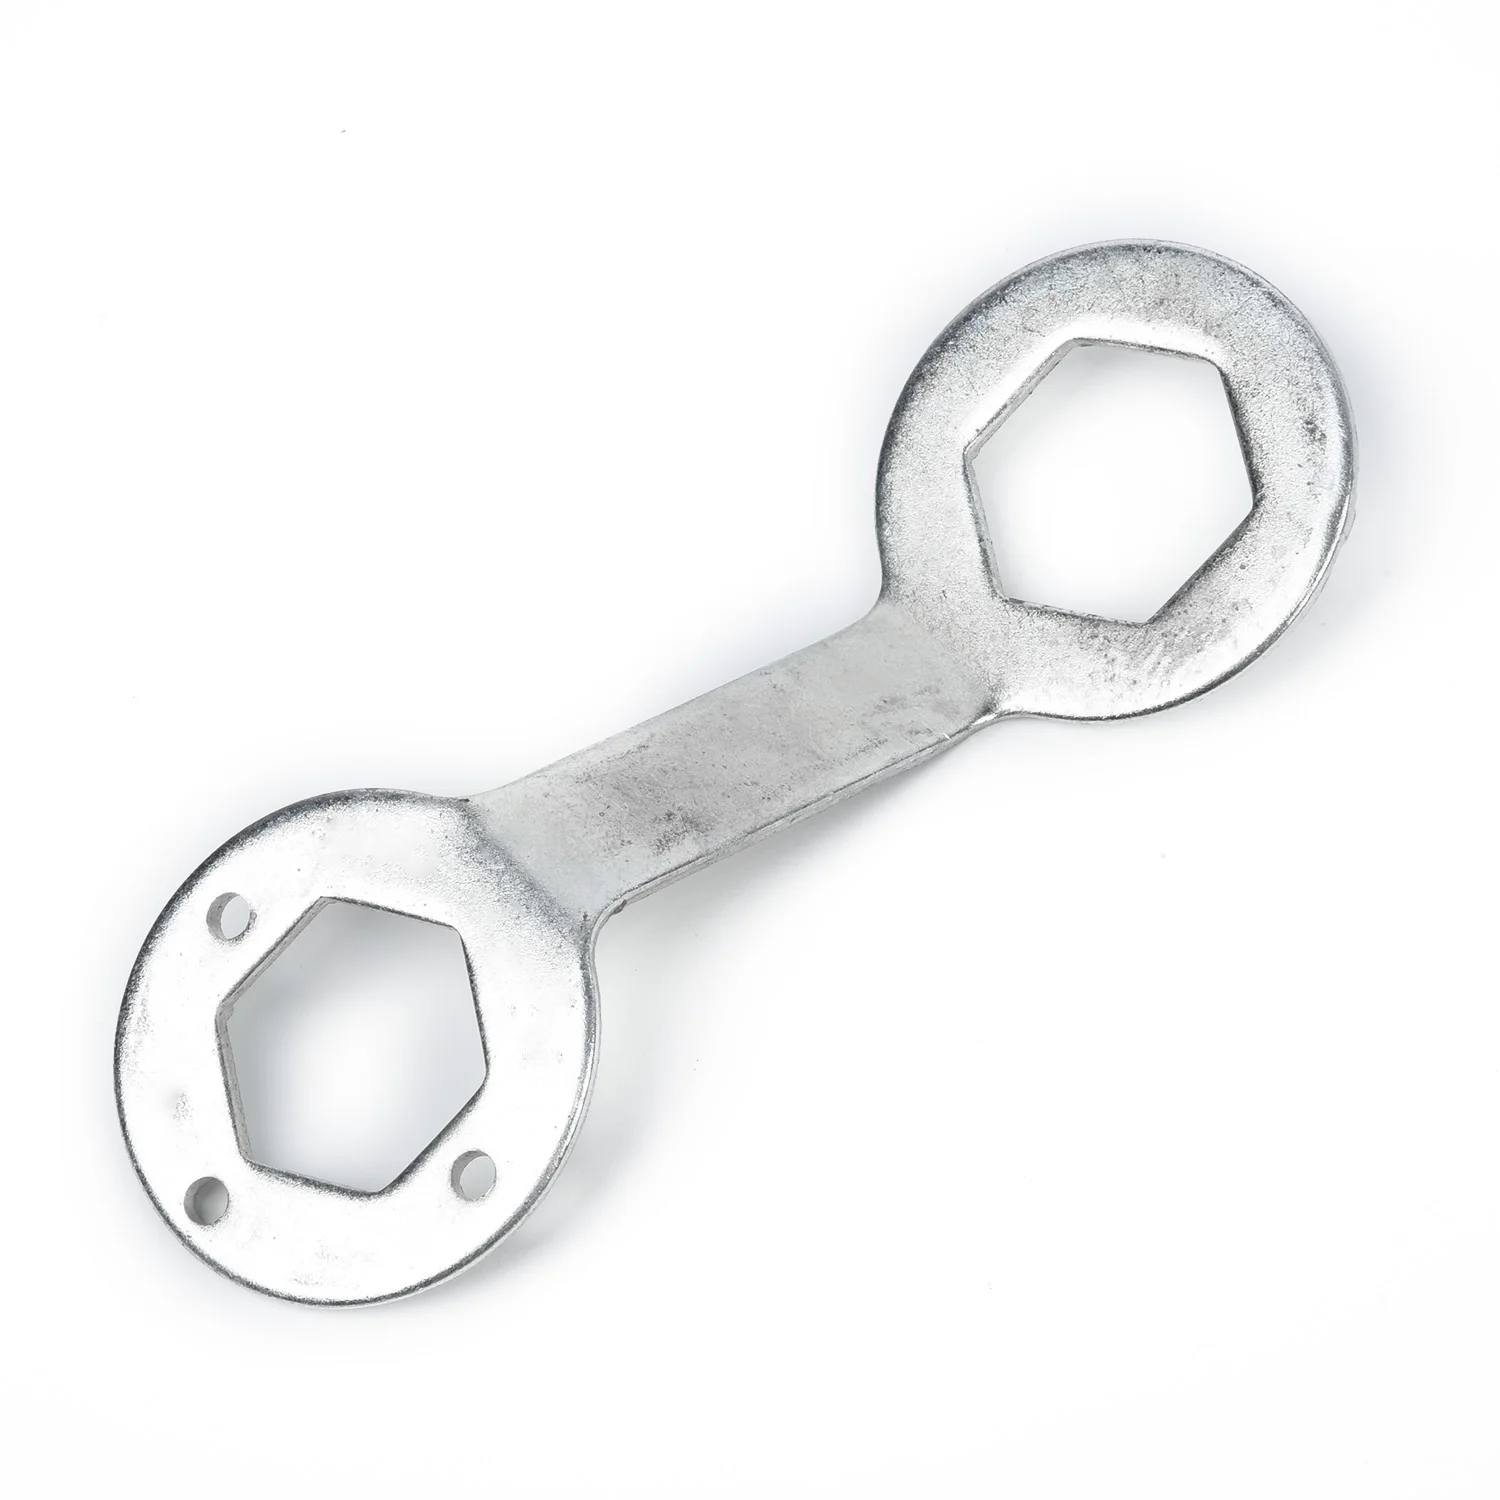 Thickened Nut Universal Clutch Wrench Washing Machine Clutch Disassembly Wrench 36mm 38mm Repair Tools